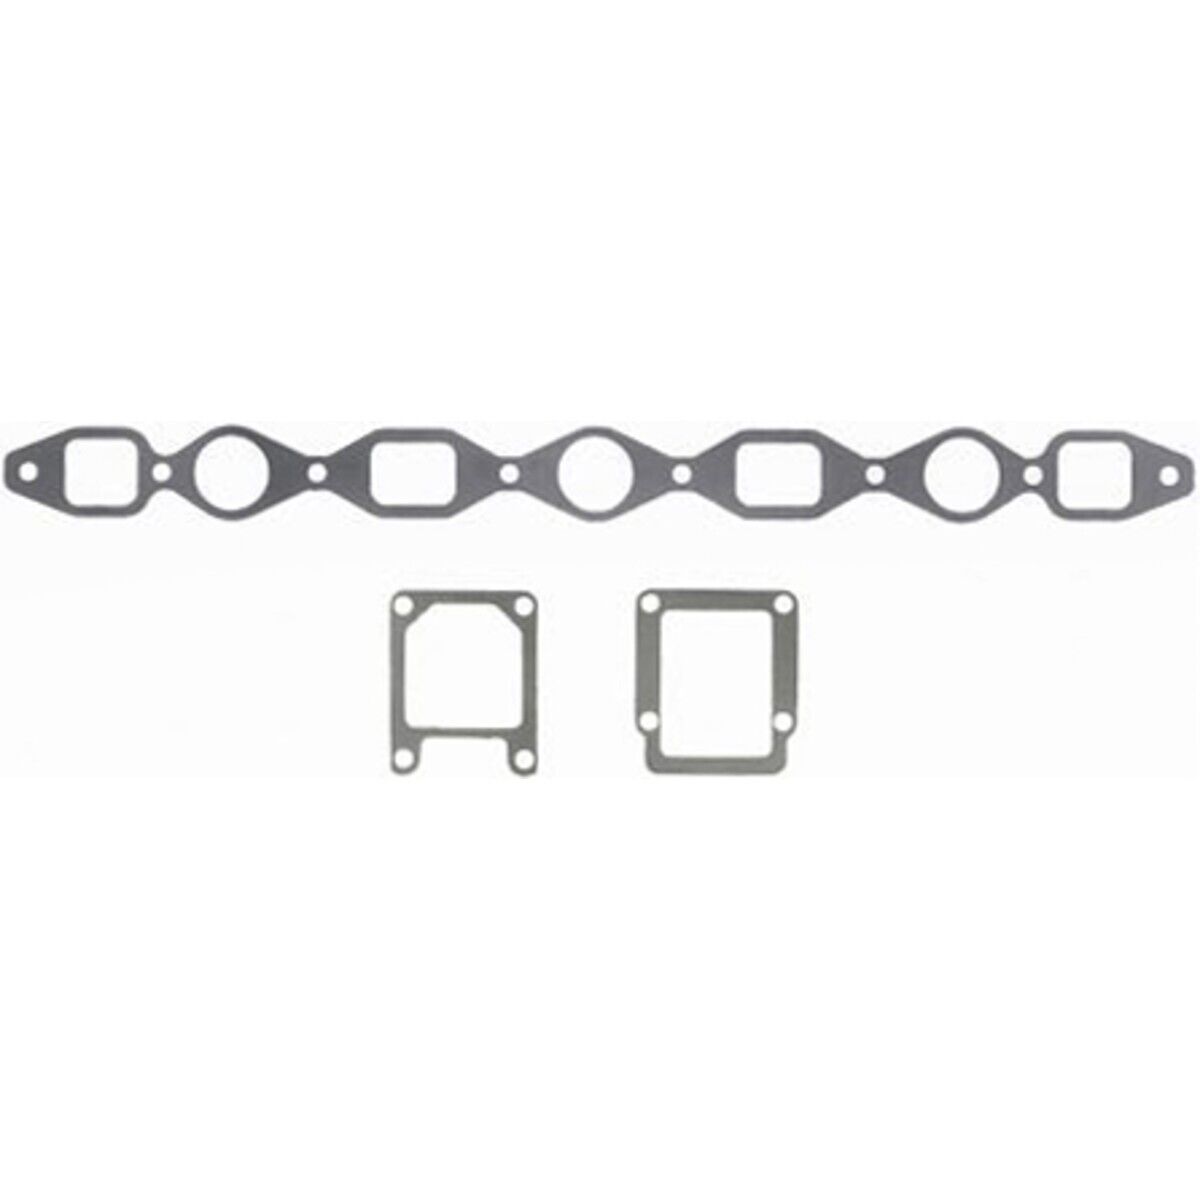 MS9341S Felpro Intake & Exhaust Manifold Gaskets Set for 1000 1100 1200 1300